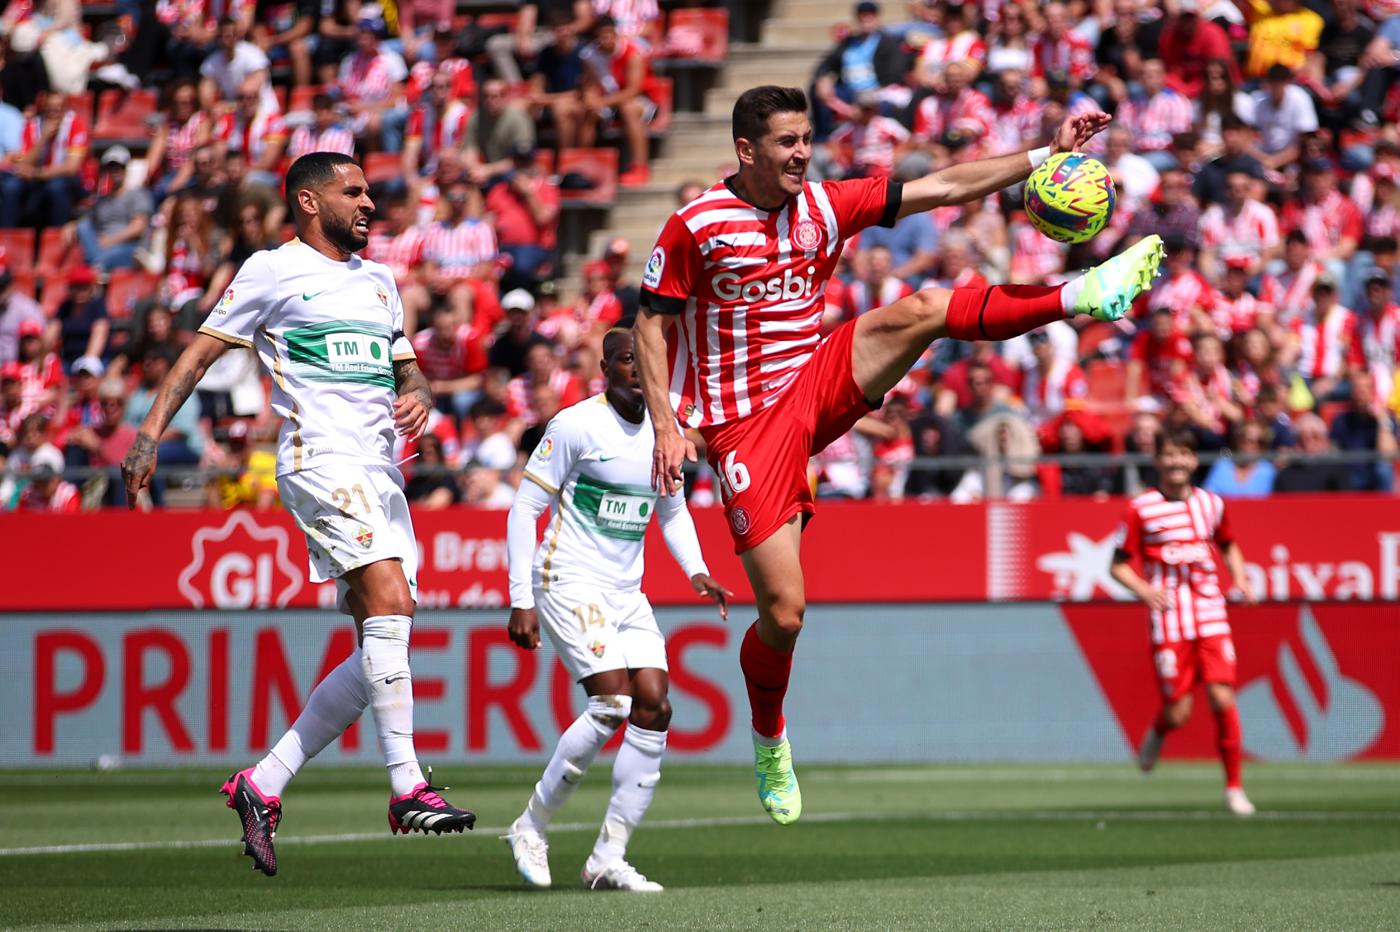 Girona - Elche: where to watch, online broadcast (April 16)